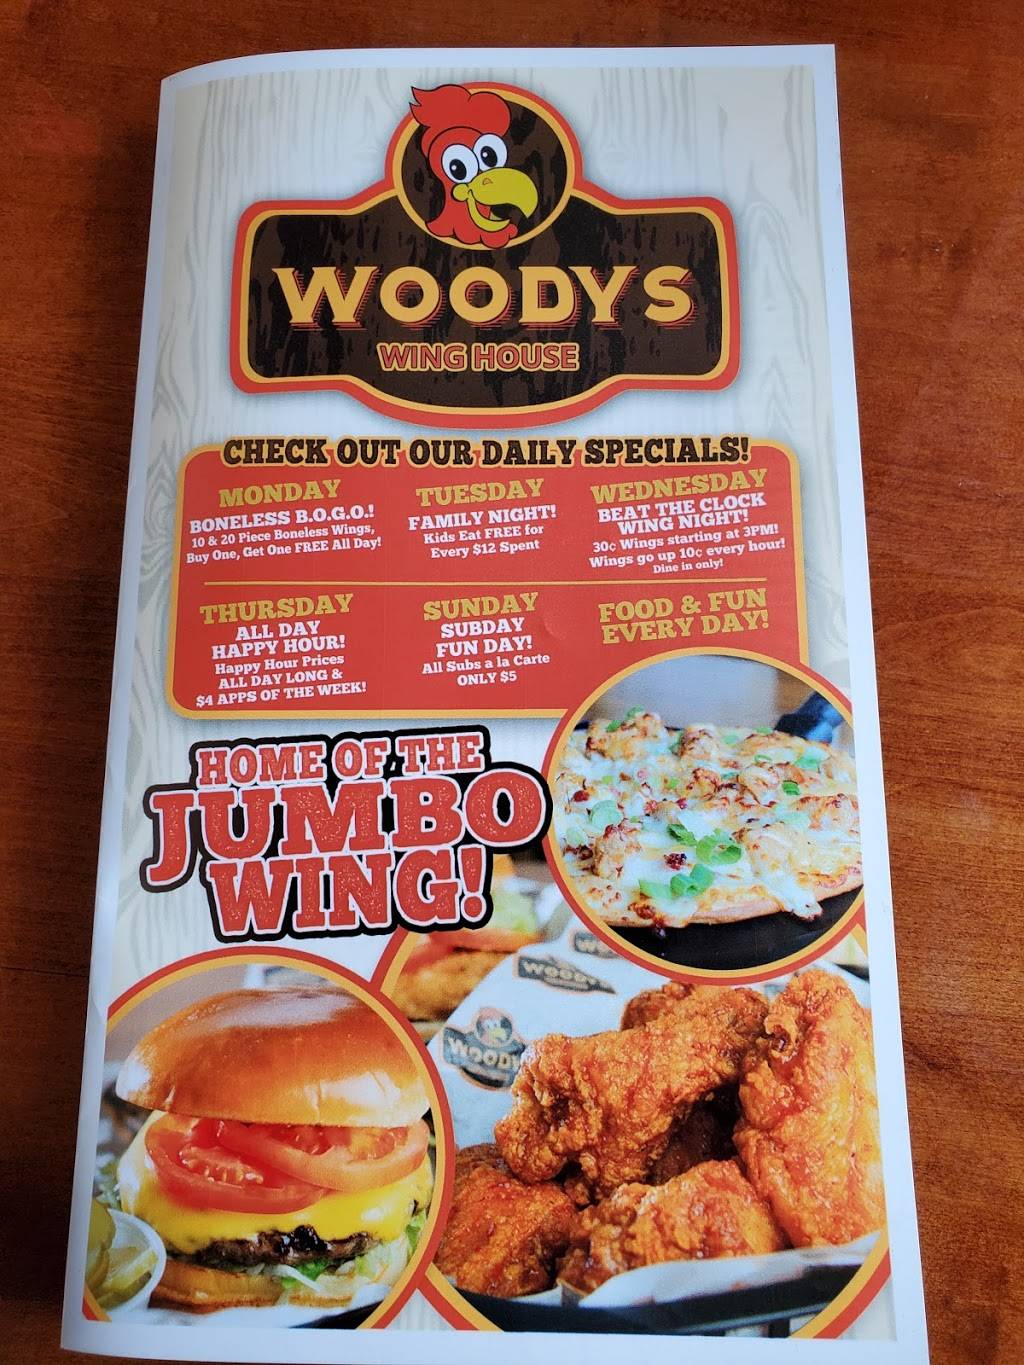 Woodys Wing House | 1840 Hilliard Rome Rd, Hilliard, OH 43026 | Phone: (614) 777-1818